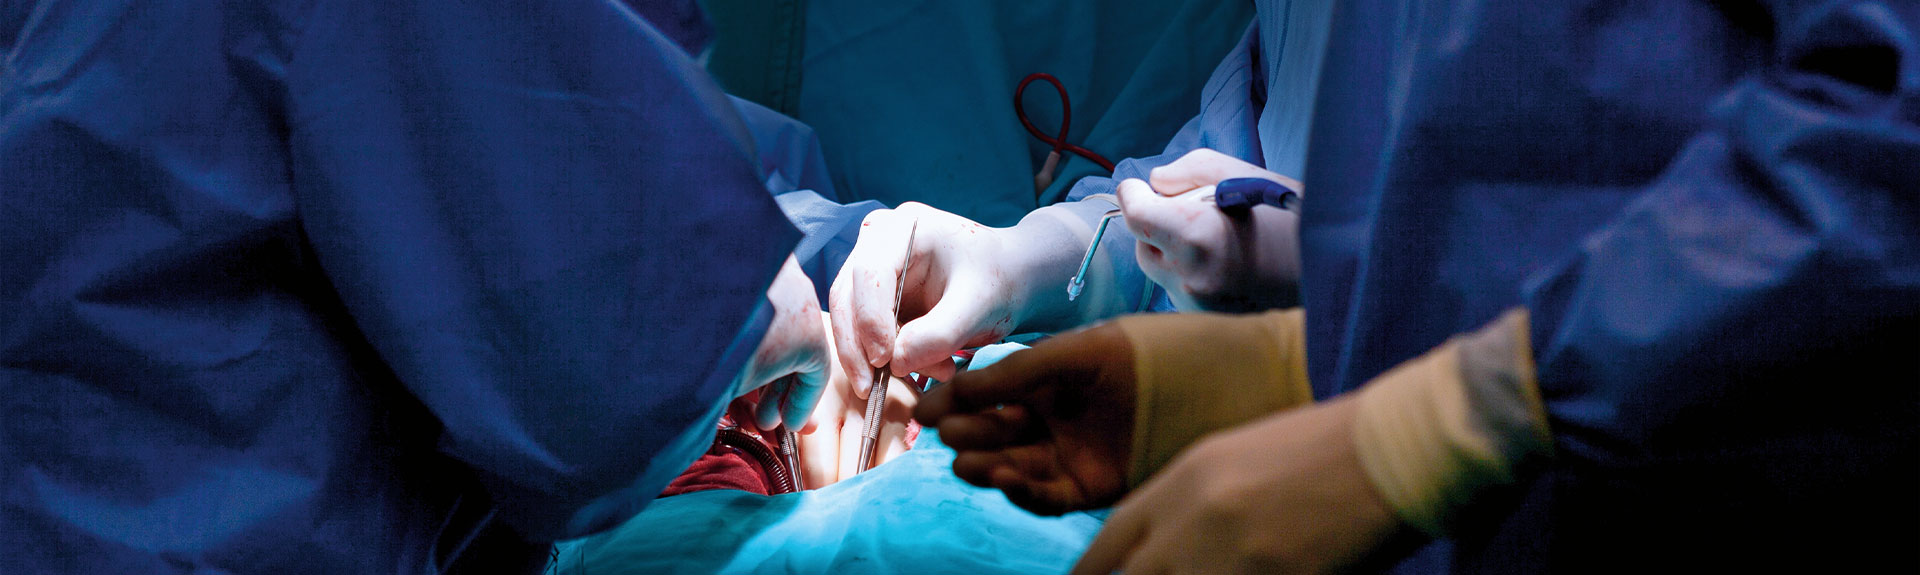 A photo showing a coronary artery bypass grafting procedure.